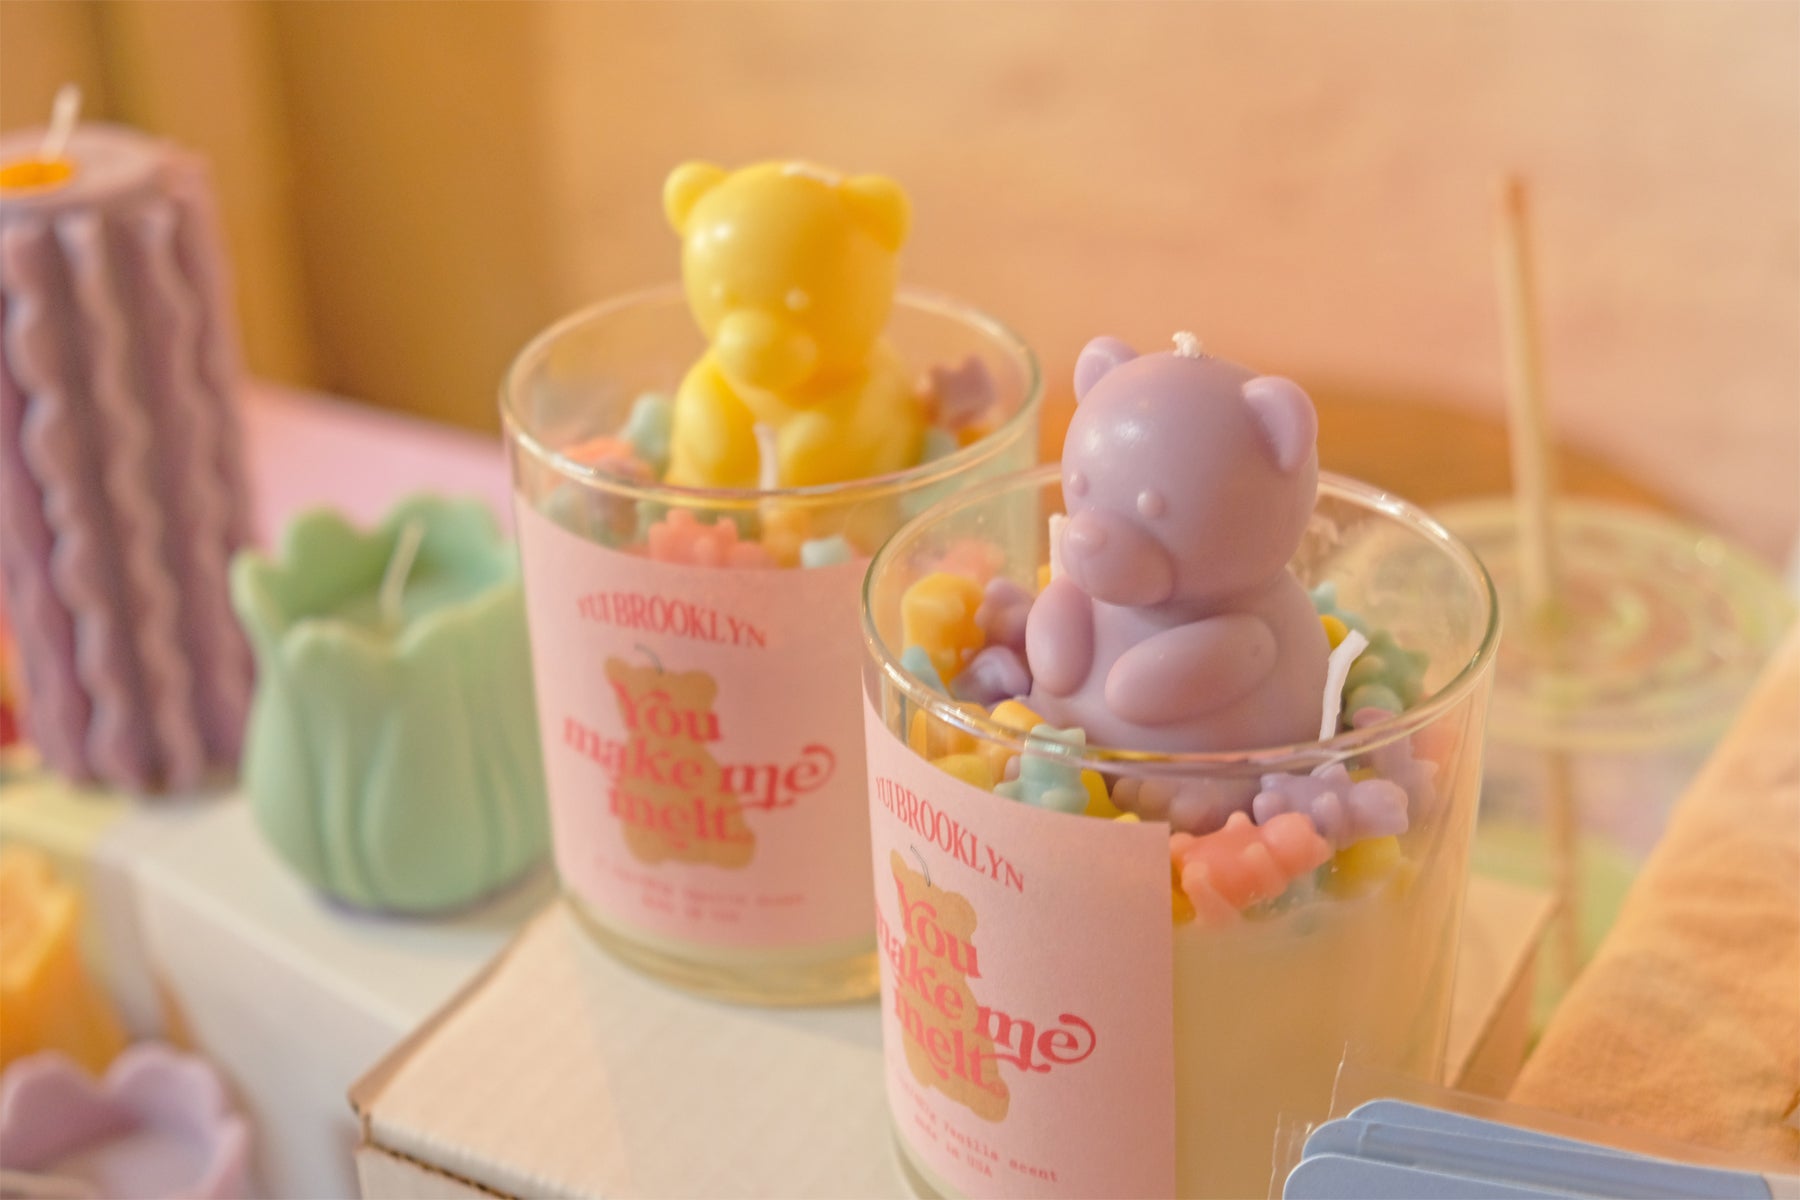 Scented Jar candle with Teddy bear on top │ Soy Wax Candle – Yui Brooklyn